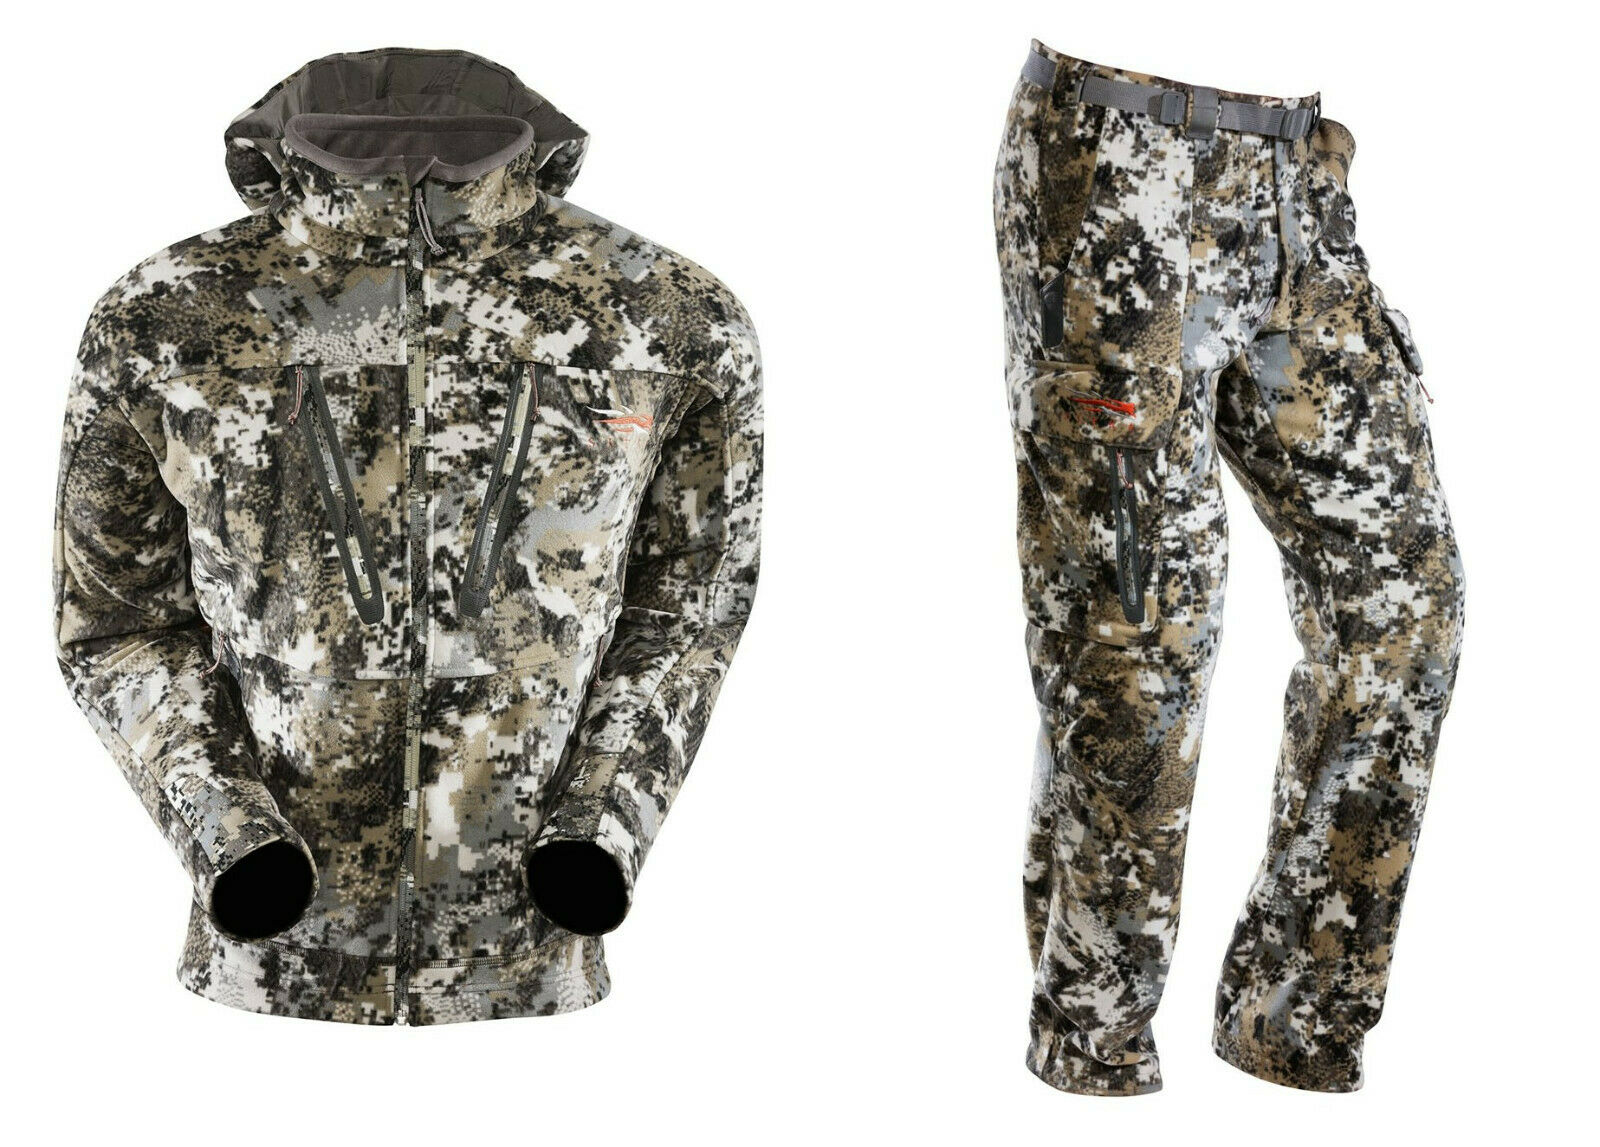 New Sitka Gear Stratus Jacket & Pants Optifade Elevated Ii Pick Your Size!